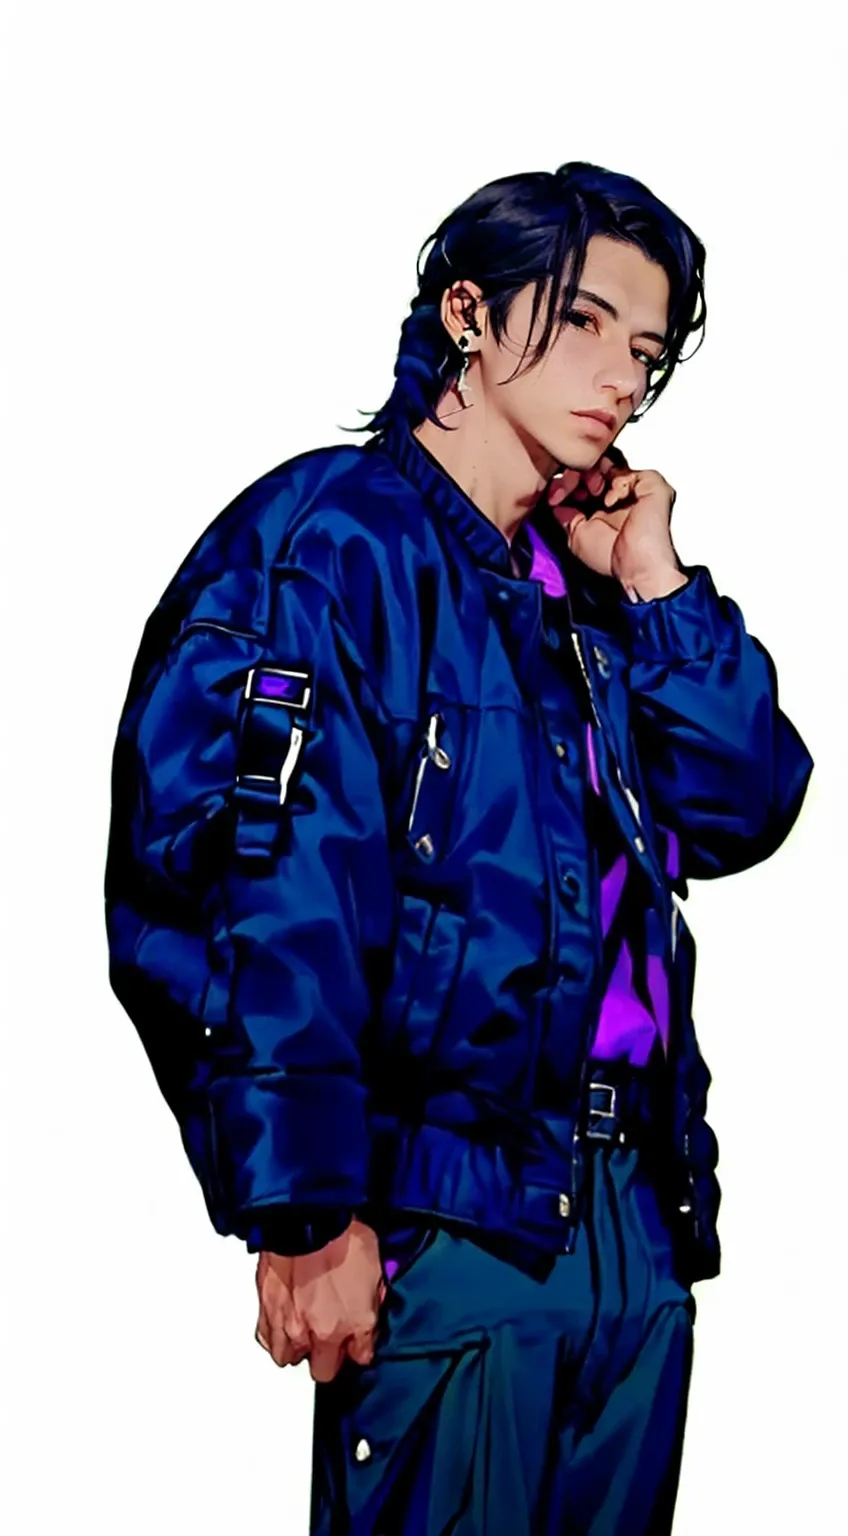 qaiwachgan face, beautiful final fantasy male, man in a purple black jacket, wearing a bomber jacket, wearing an aviator jacket, Brown pants, full body close-up shot, wearing ripped flight suit, close up half body shot, egocentric boy pose, main character, handsome, black hair, brown eyes, western, VERY HANDSOME, age 25, perfect lips, perfect hands, ear dangle earring, alpha male type, short black hair, standing against a plain white wall, purple final fantasy cinematic lightning, professional lighting, sunbeam, bokeh, dramatic lighting, 